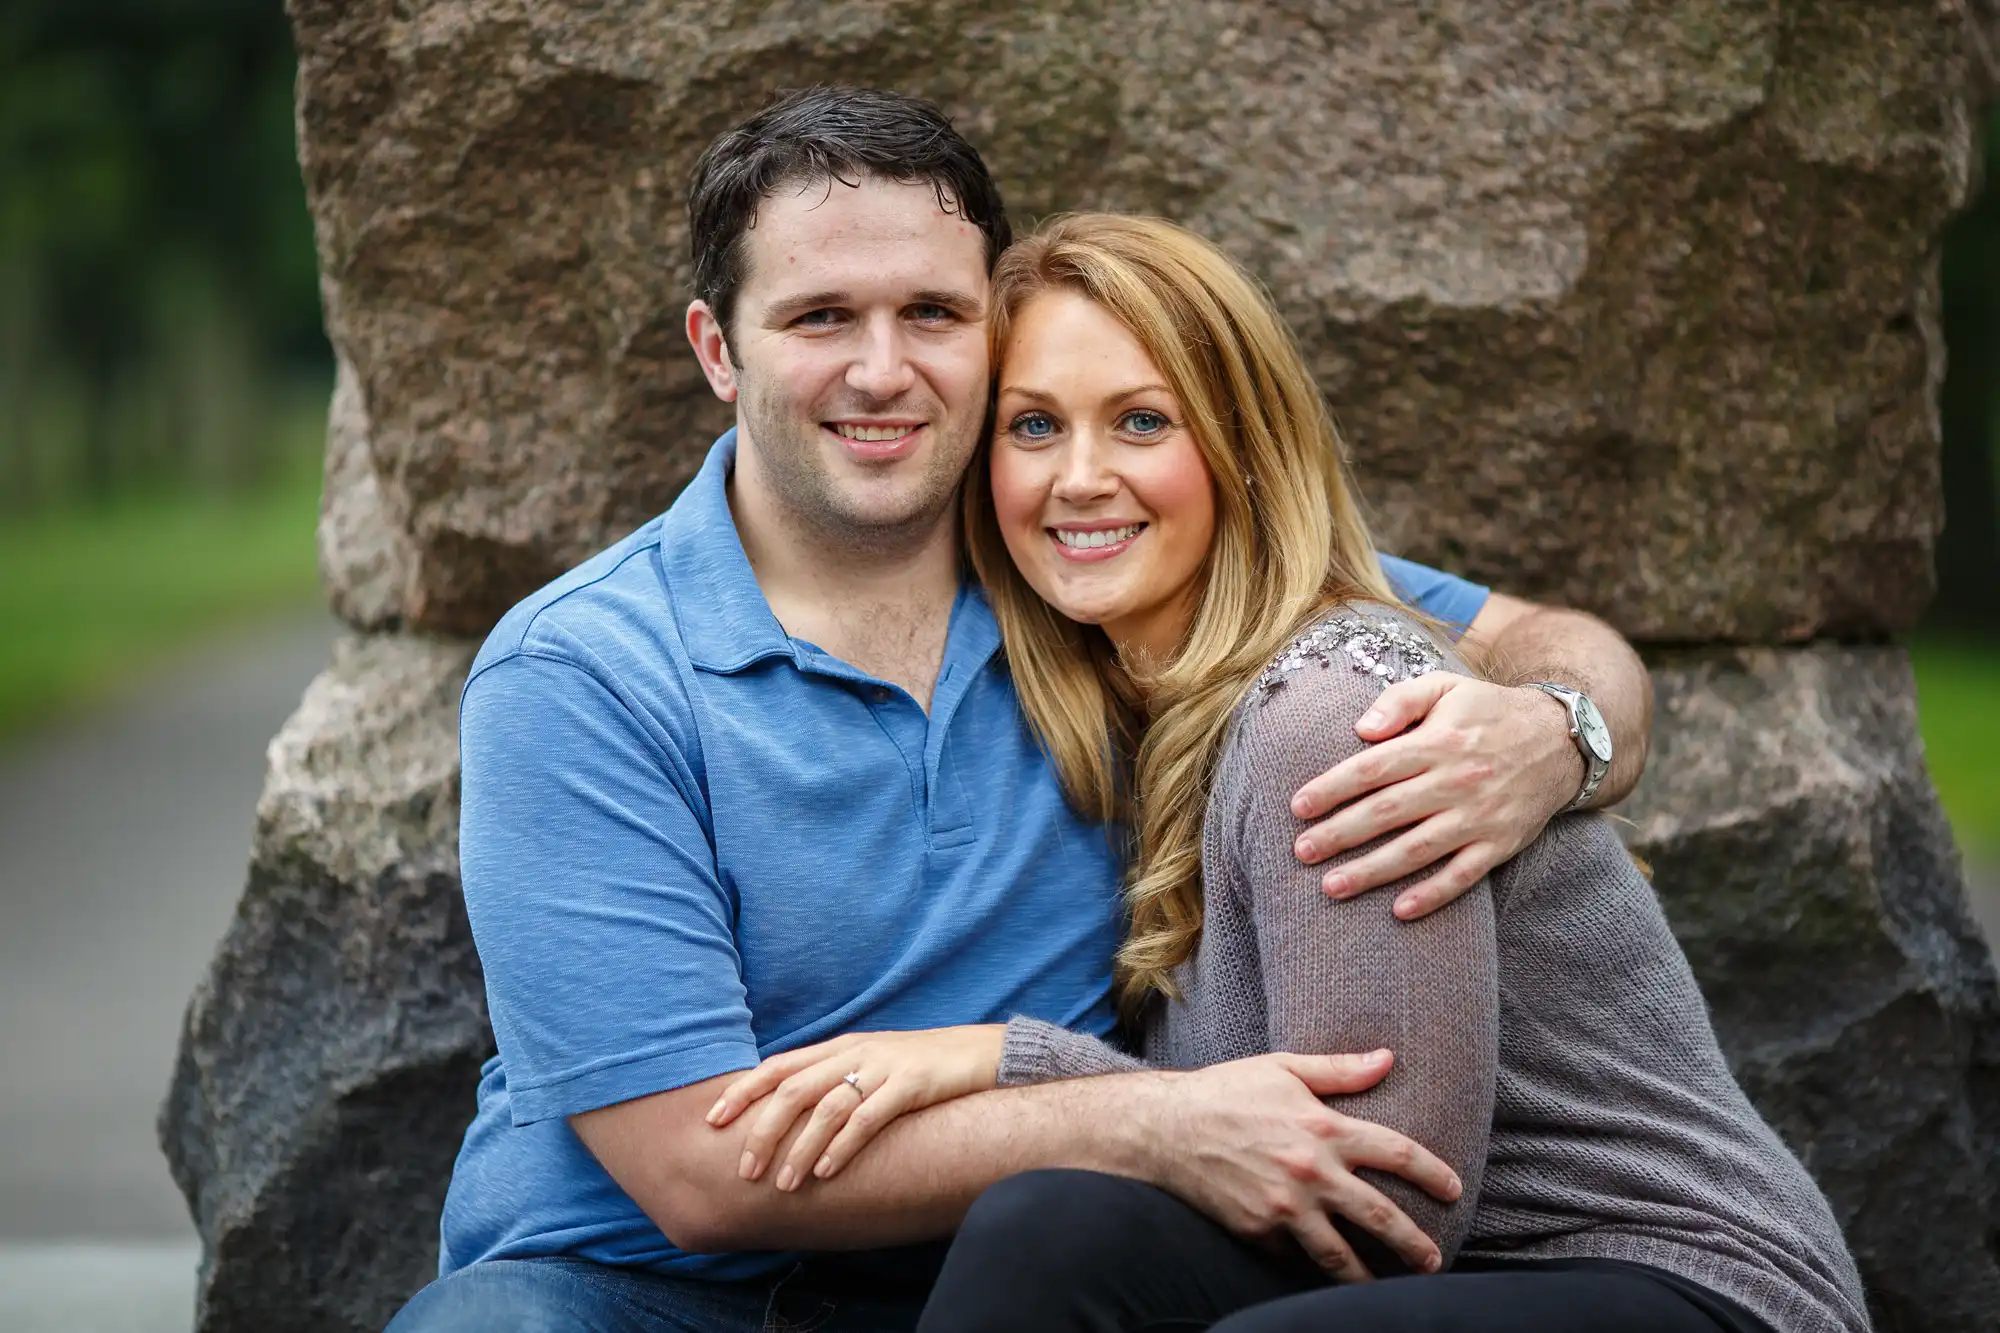 A man and a woman smiling and embracing while sitting on a large rock in a park.